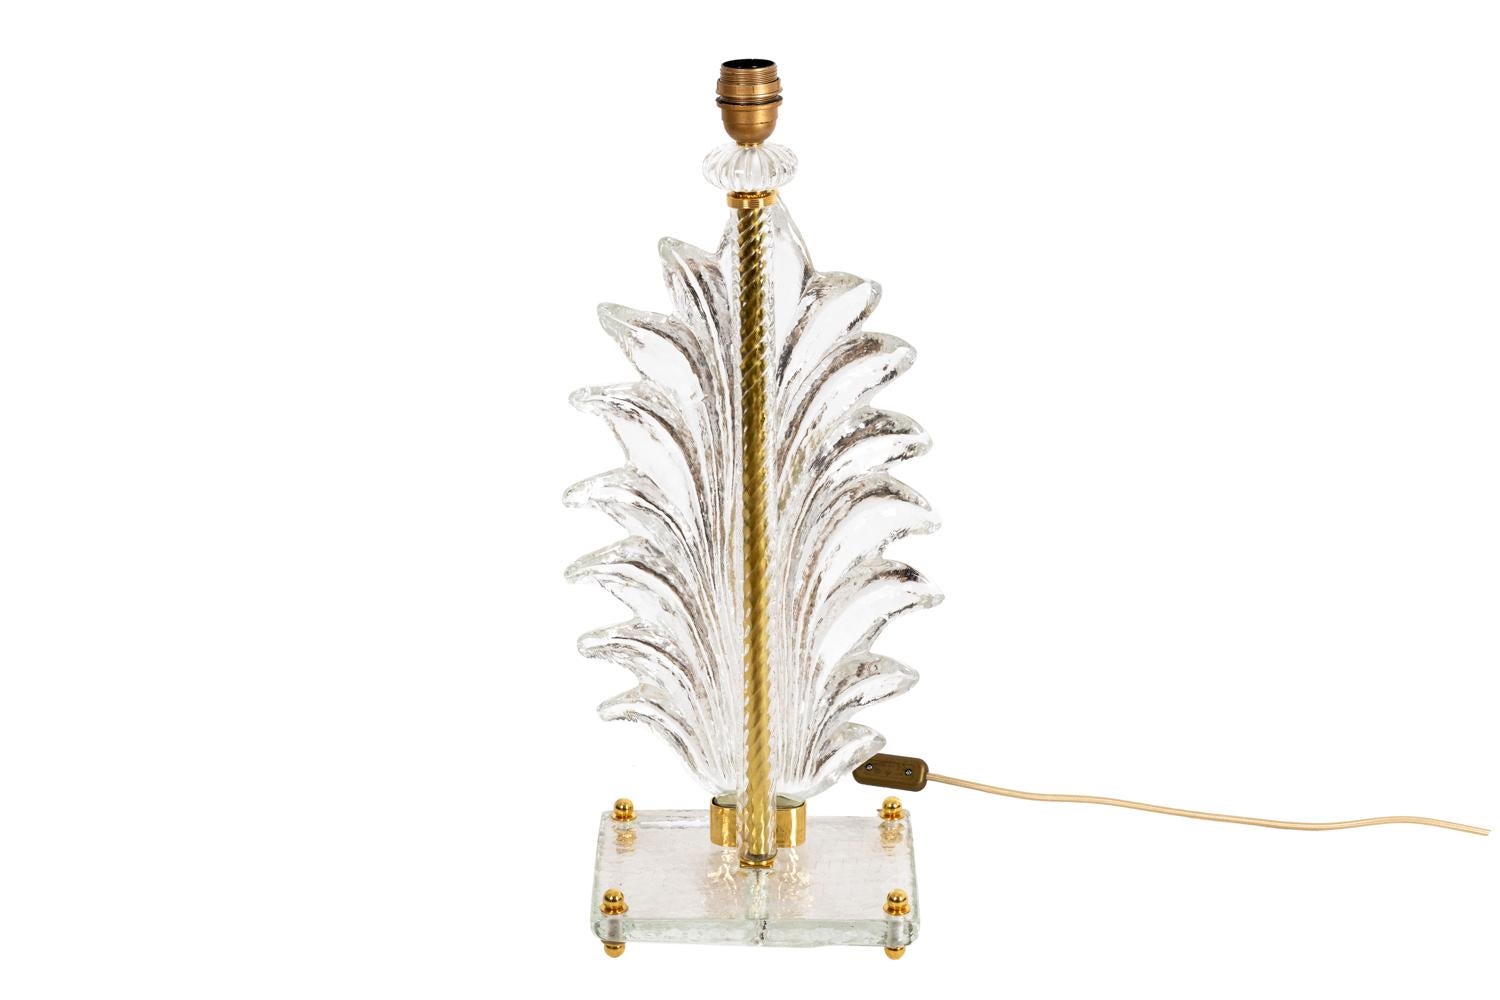 Fern lamp in Murano glass with a fern shape shaft hung to a swirl shaft by a gilt brass link, topped by a flat gadroons ball and finished by a gilt brass ring. Rectangular glass base standing on four small gilt brass shoes.

Italian work realized